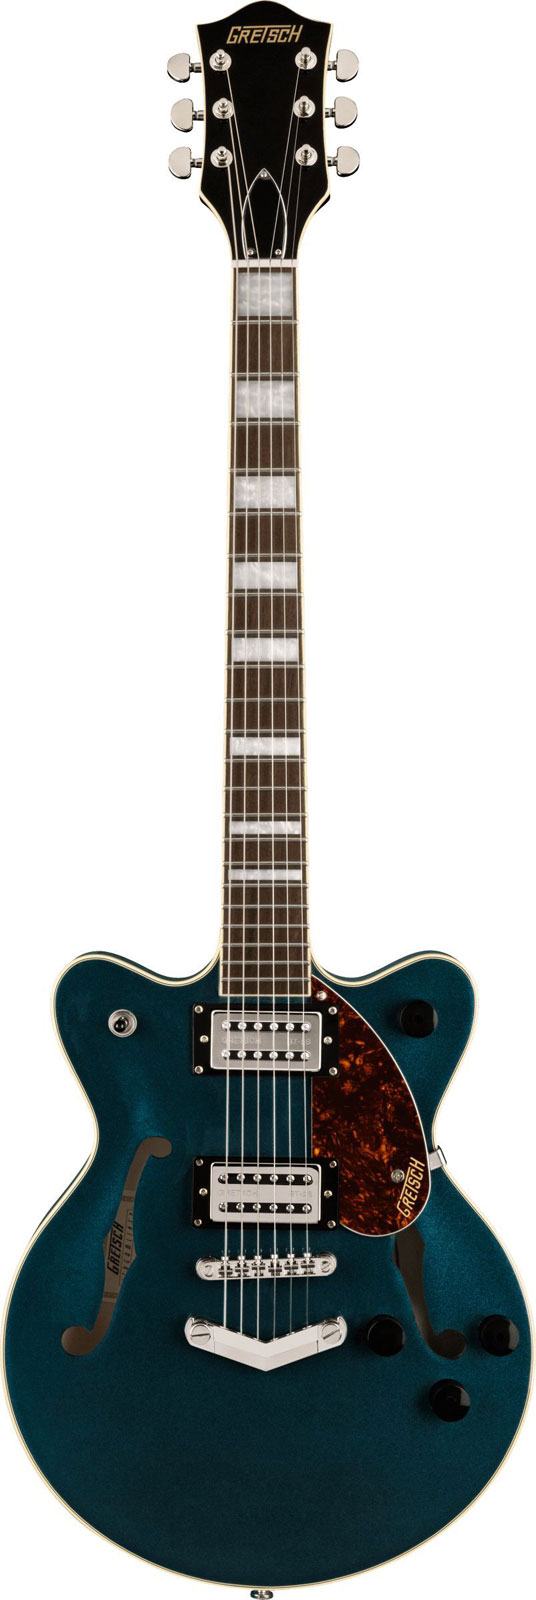 GRETSCH GUITARS G2655 STREAMLINER CENTER BLOCK JR. DOUBLE-CUT WITH V-STOPTAIL IL MIDNIGHT SAPPHIRE